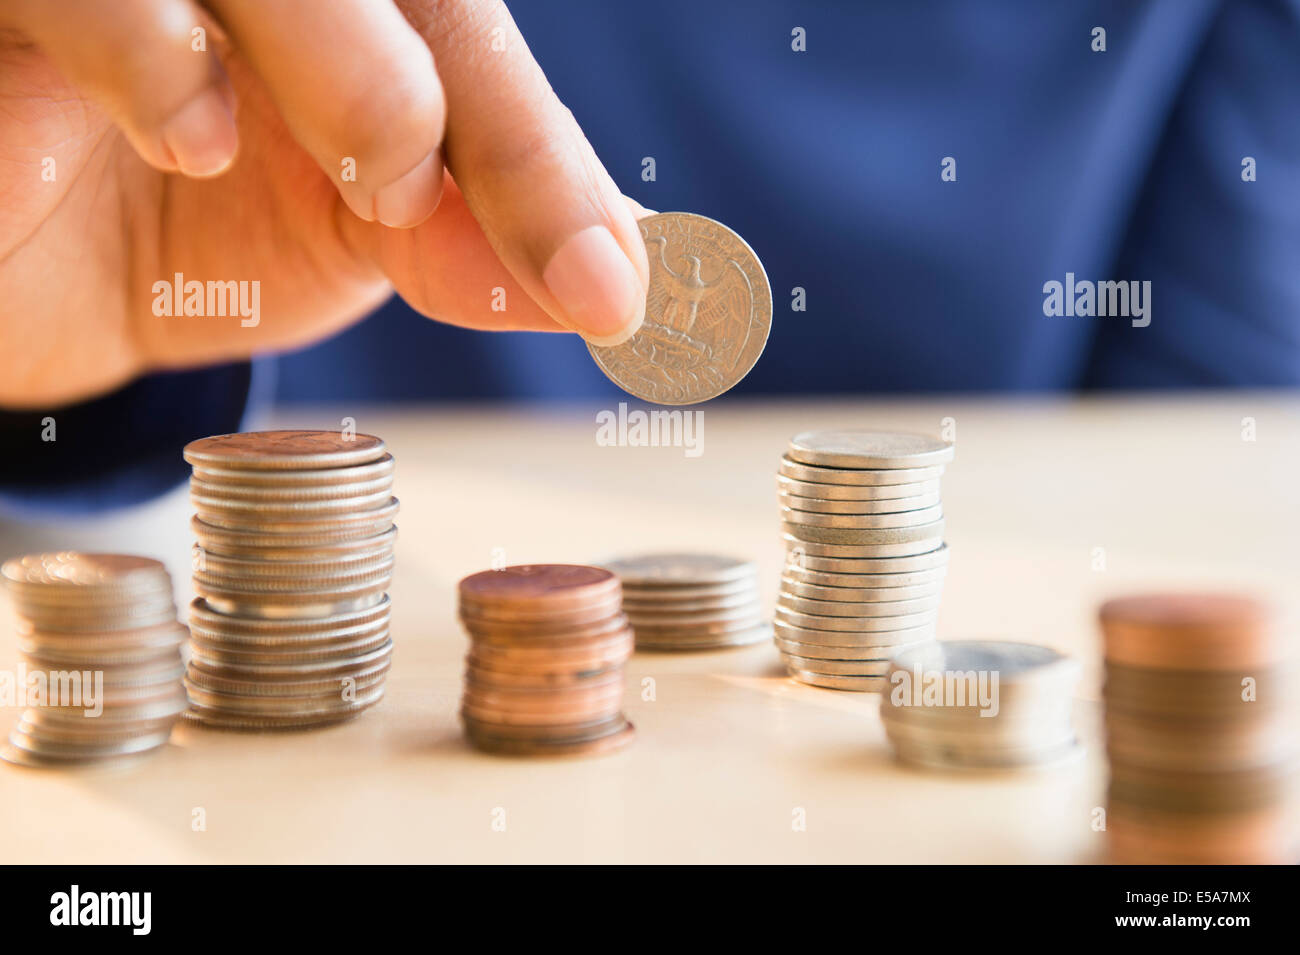 Mixed Race woman stacking coins Banque D'Images